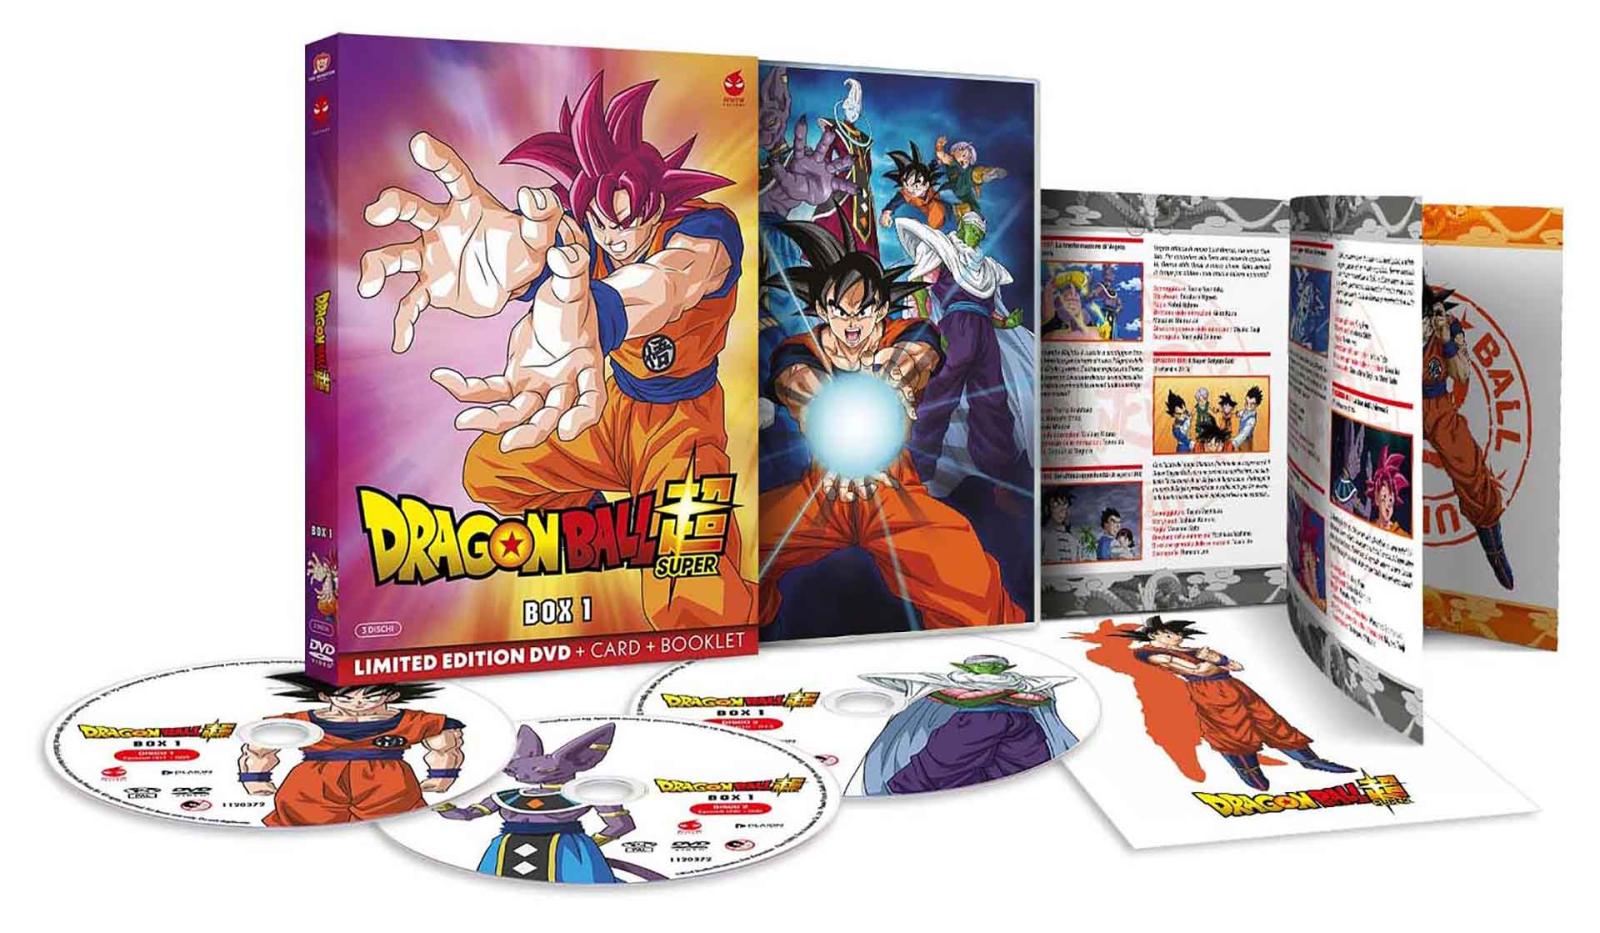 Dragon Ball Super - Volume 1 - Limited Edition 3 DVD + Booklet + Cards (DVD) Thumbnail 2